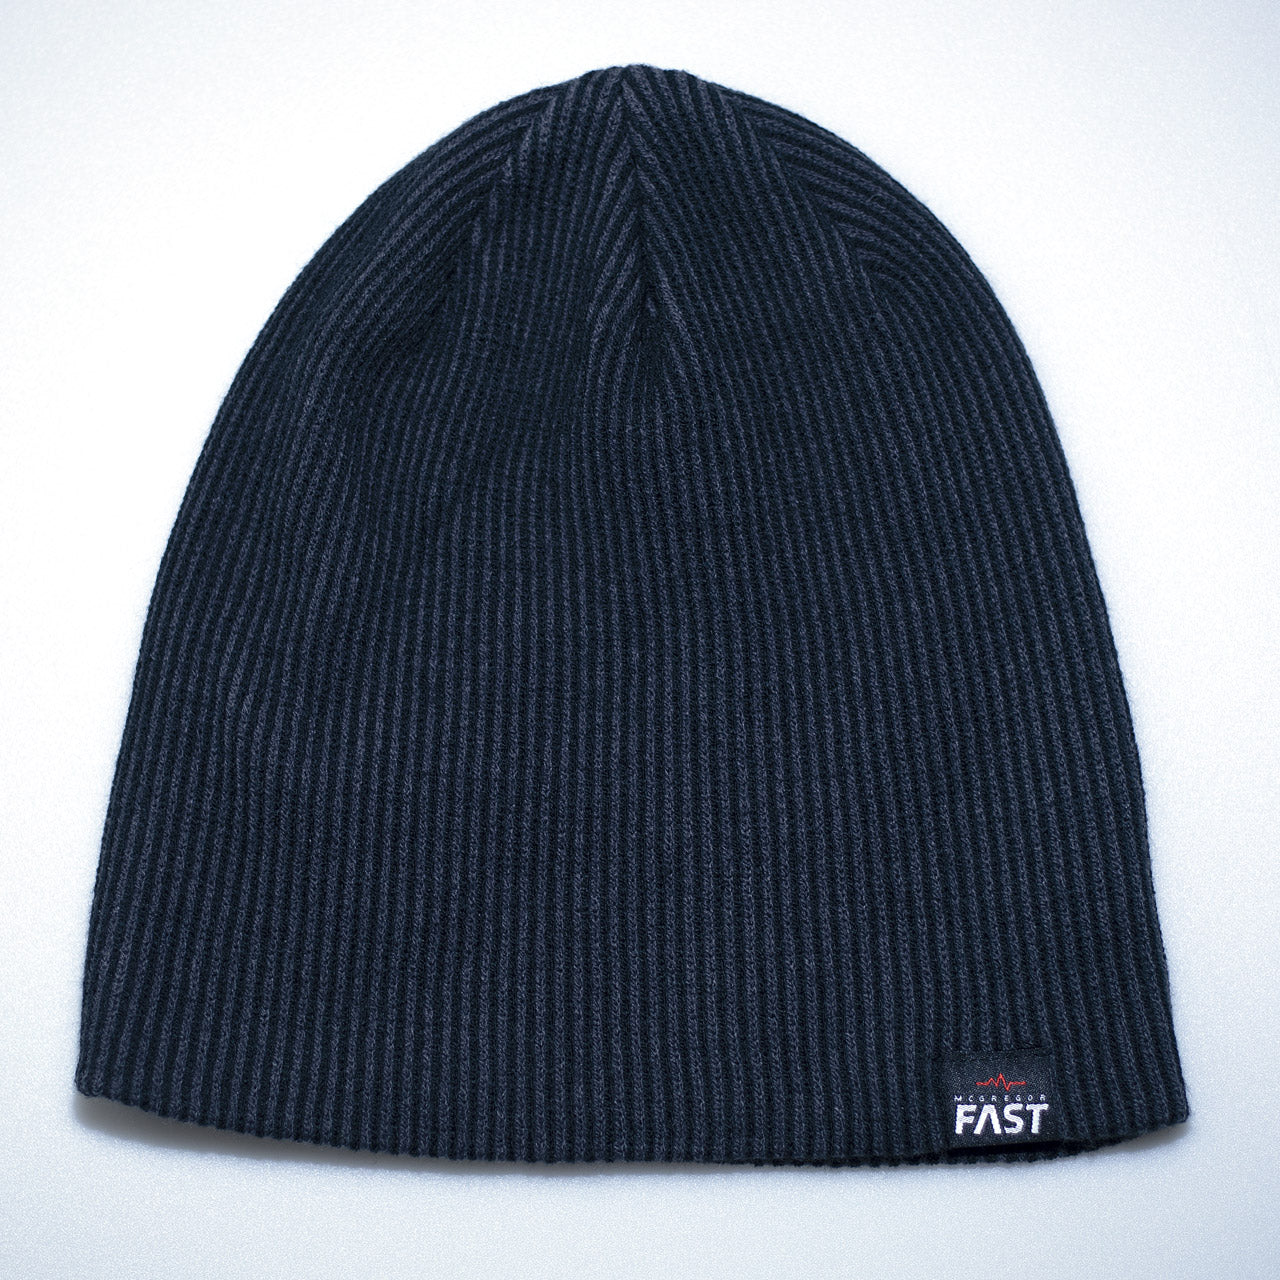 FAST Slouch Beanie